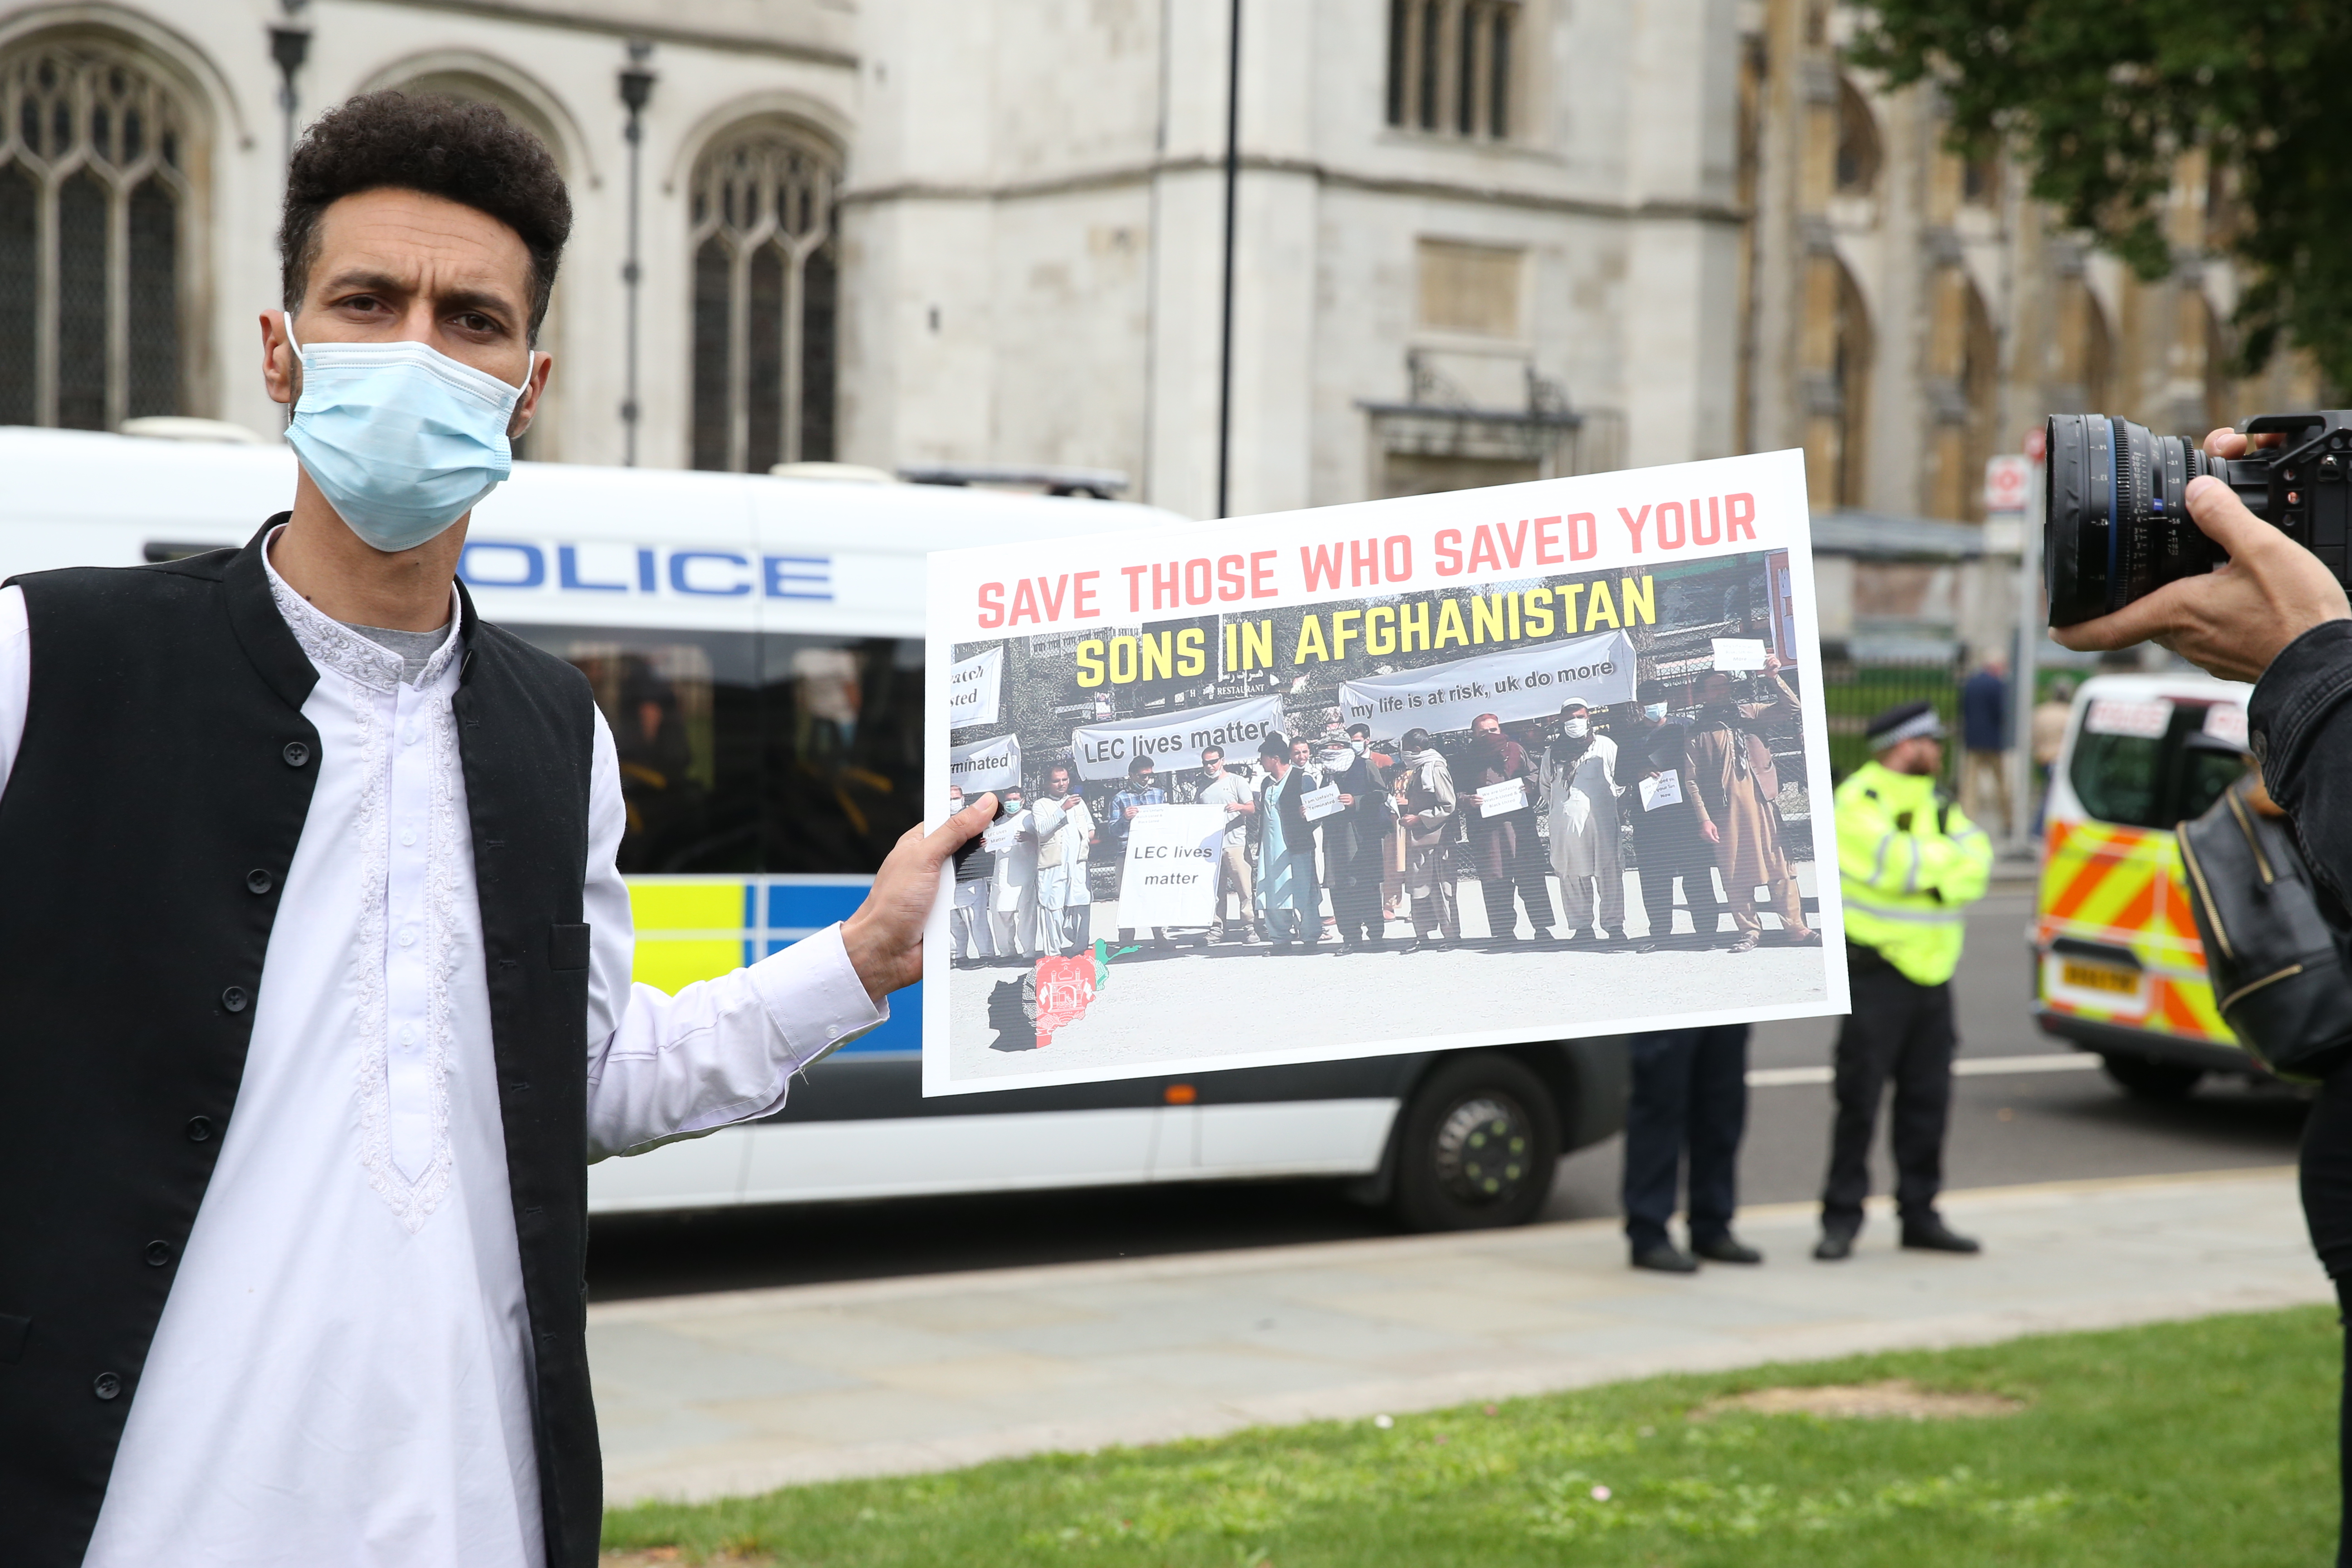 Afghans hold demonstration in London after Taliban's Kabul takeover